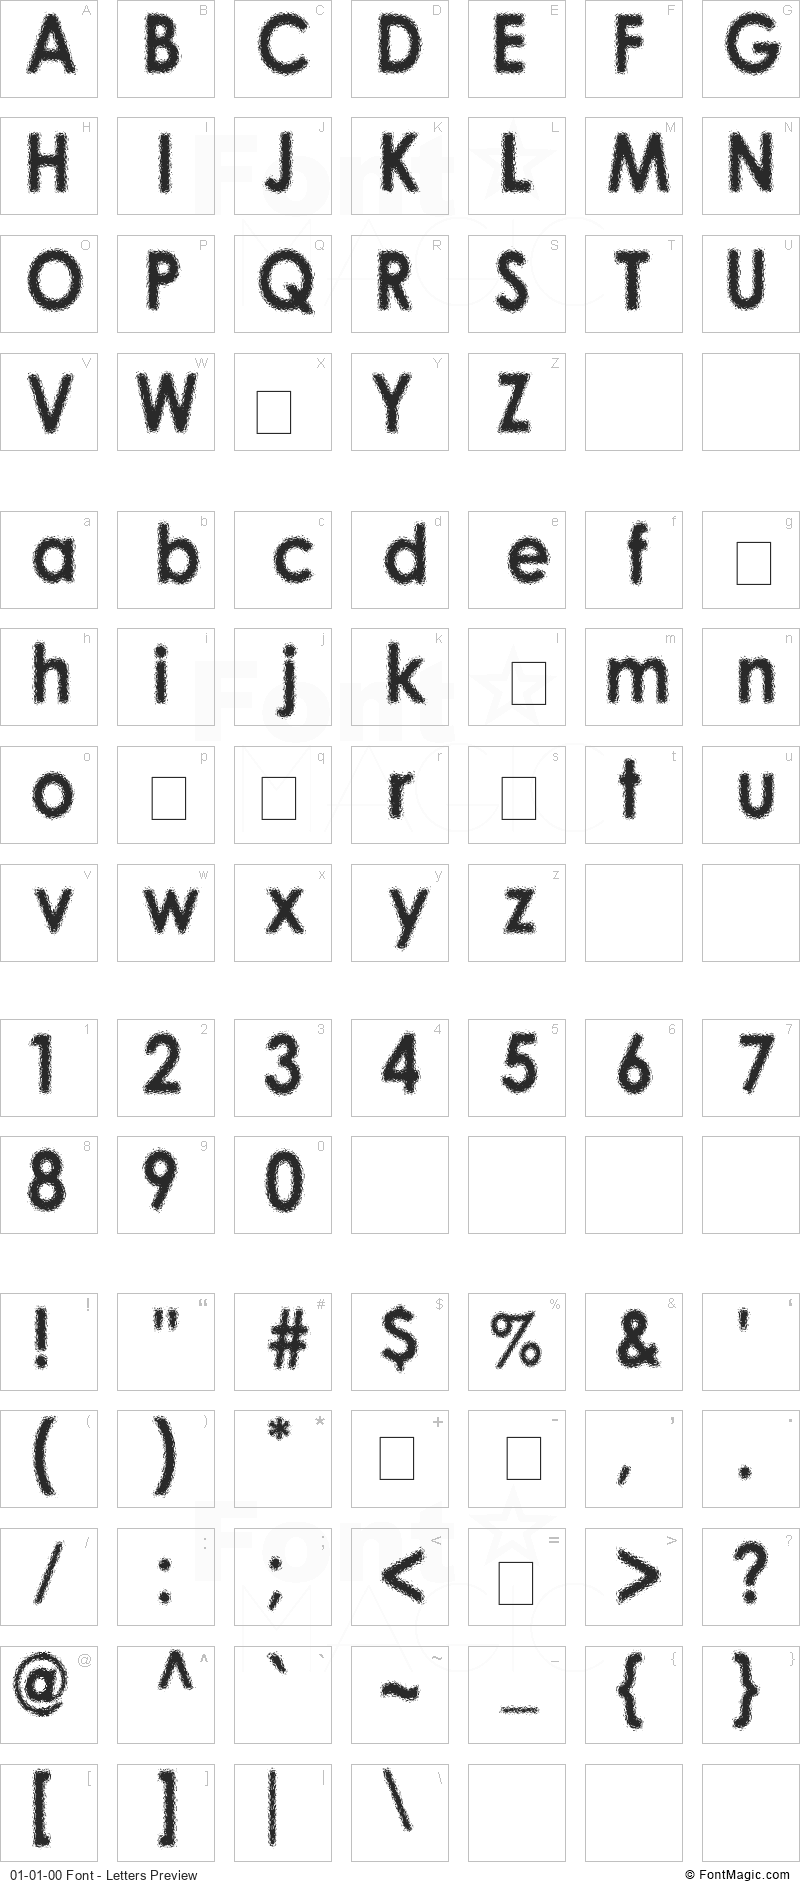 01-01-00 Font - All Latters Preview Chart